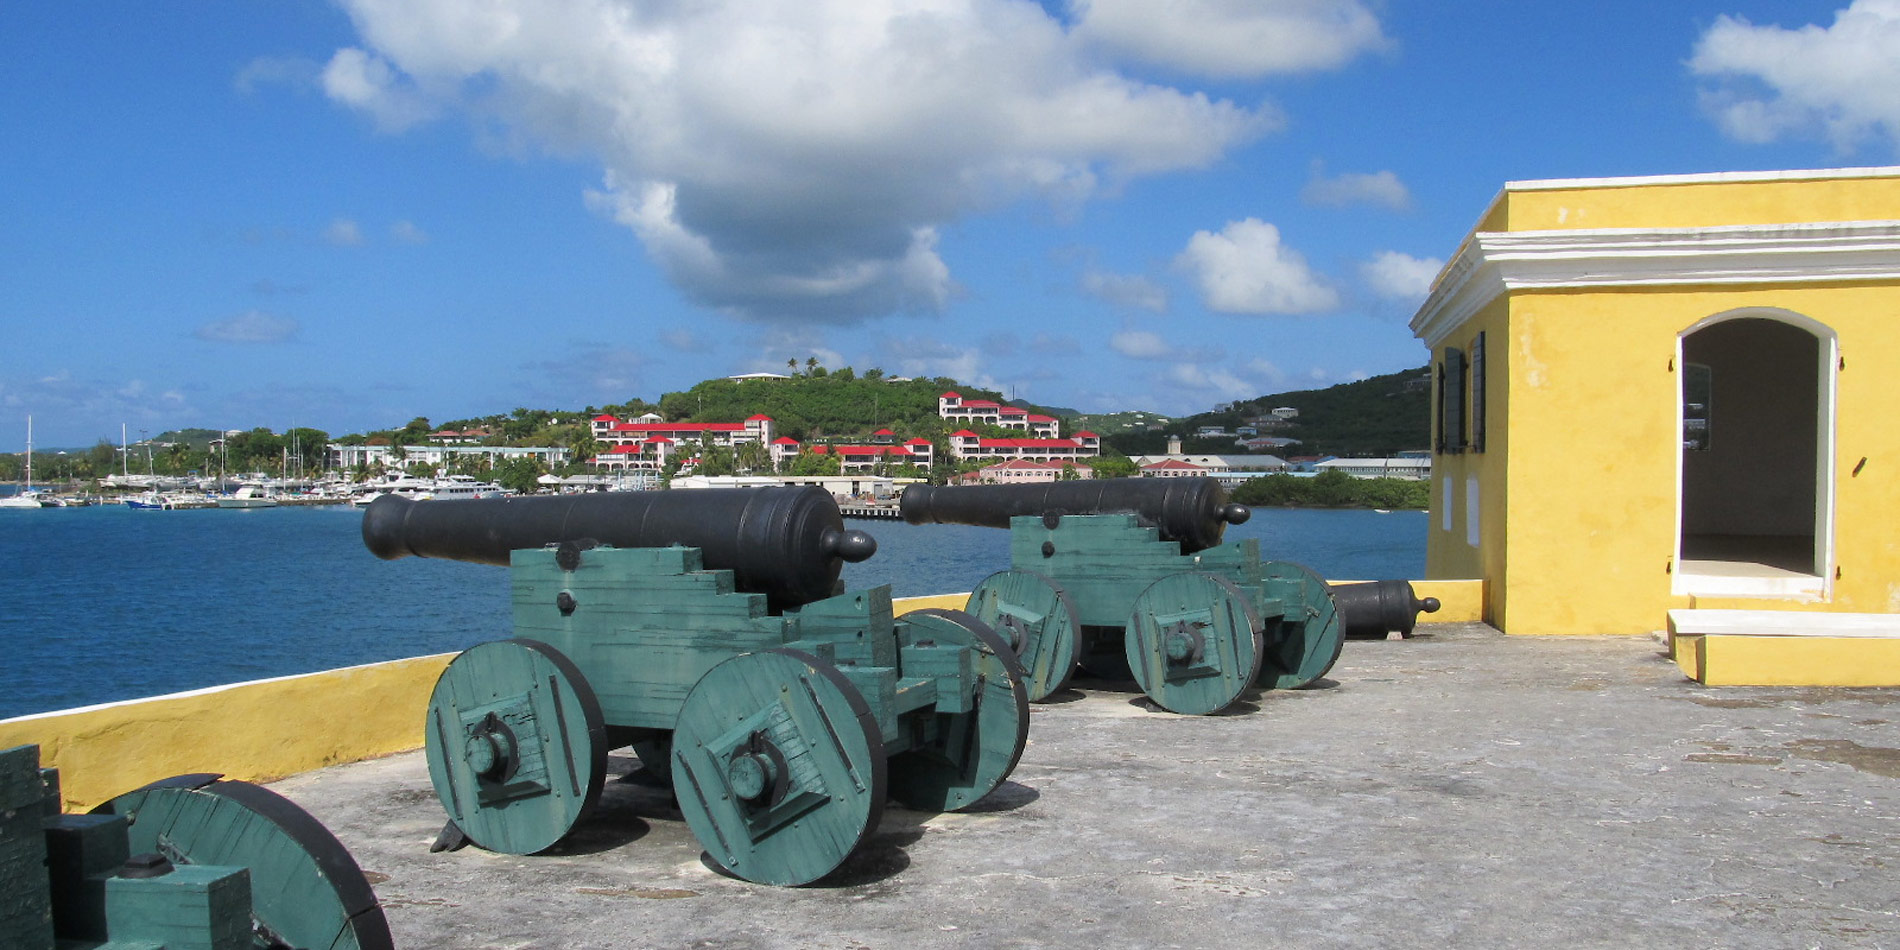 Cannons overlooking water